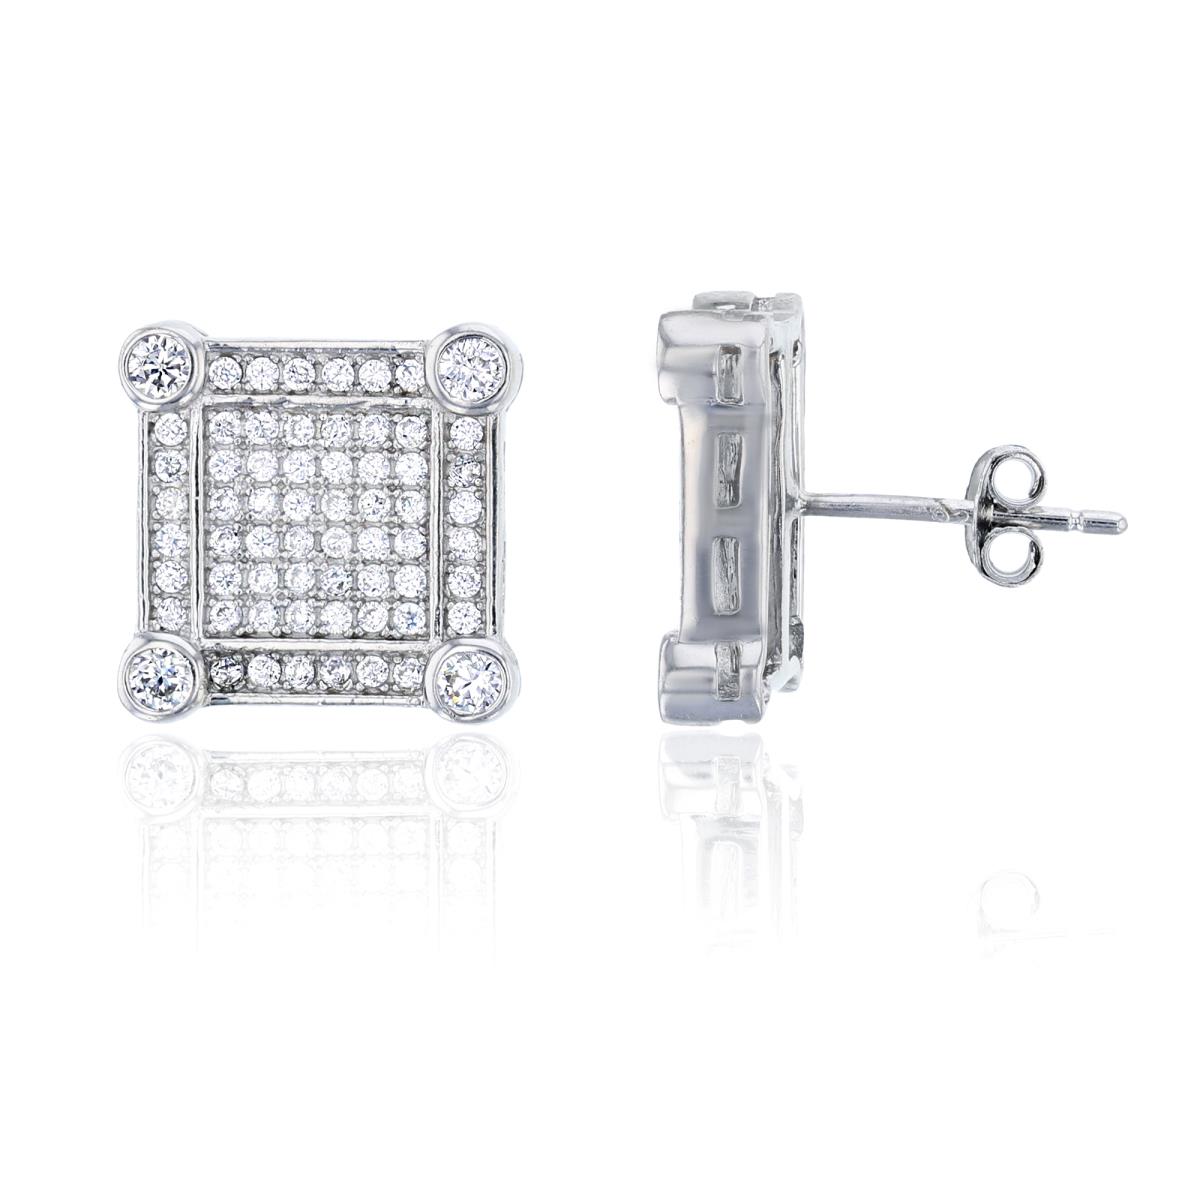 Sterling Silver 8x8mm Micorpave Square Stud Earring